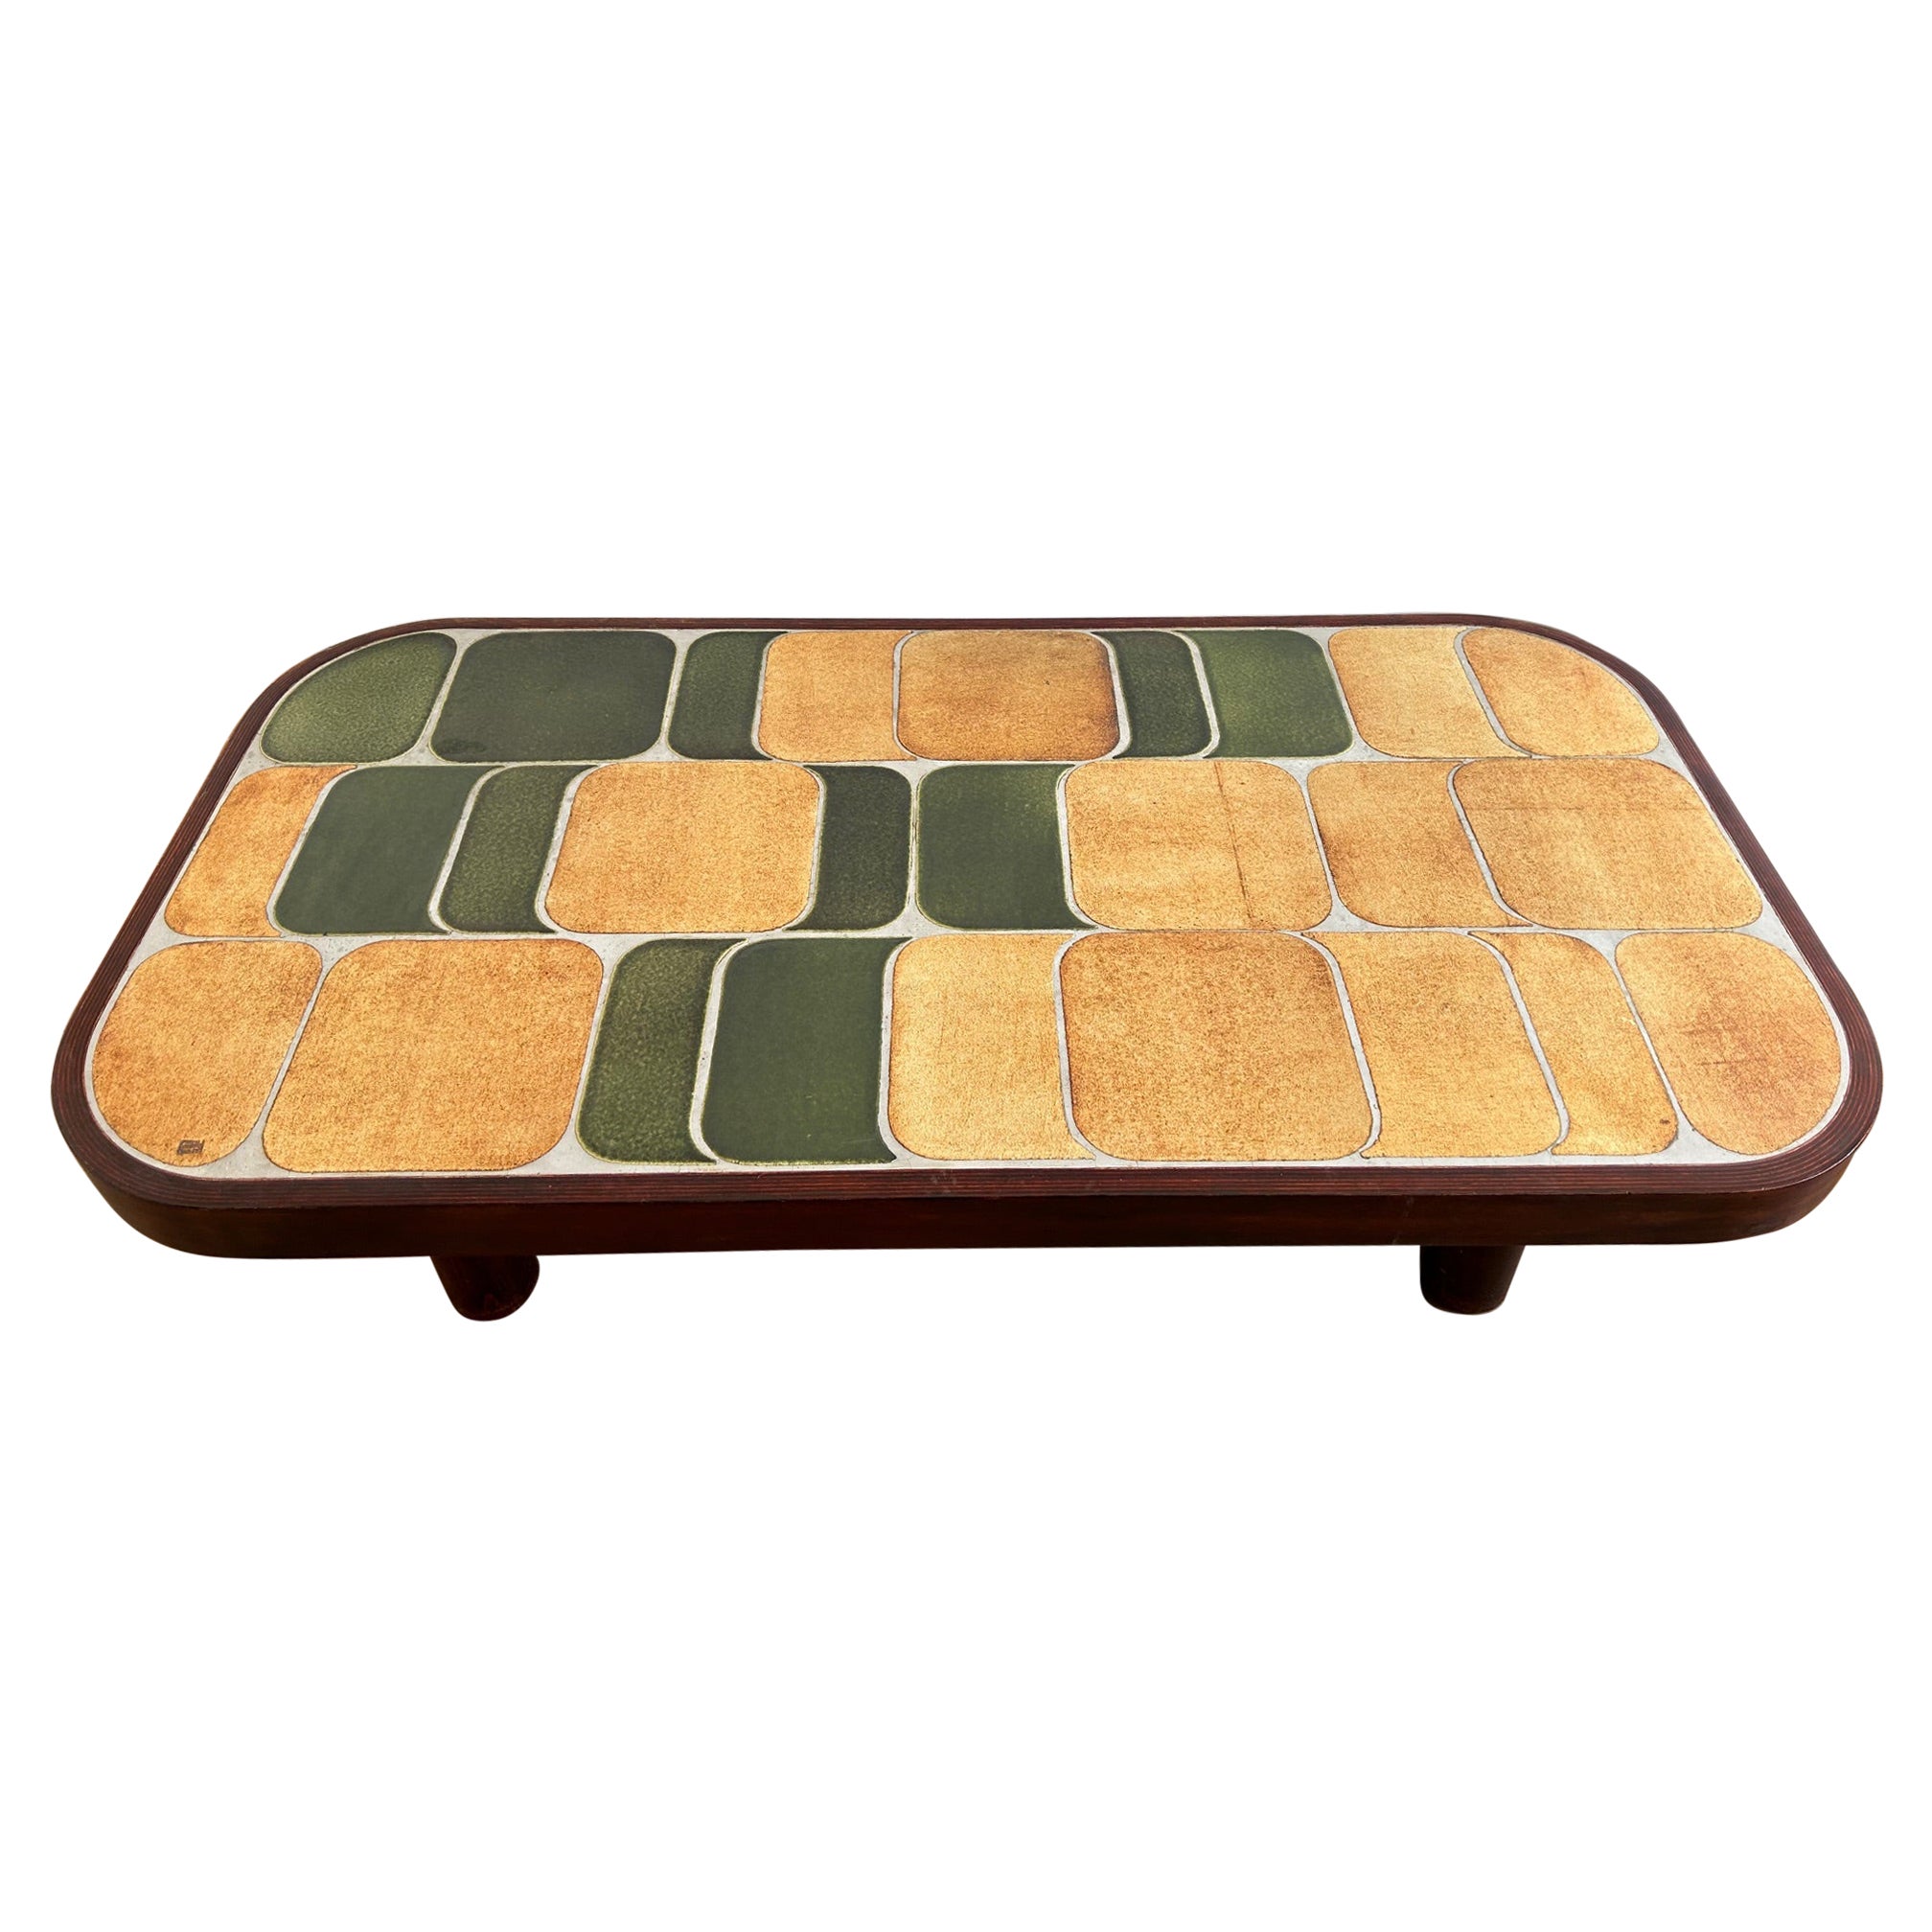 Ceramic Shogun coffee table by Roger Capron, France, 1970's For Sale